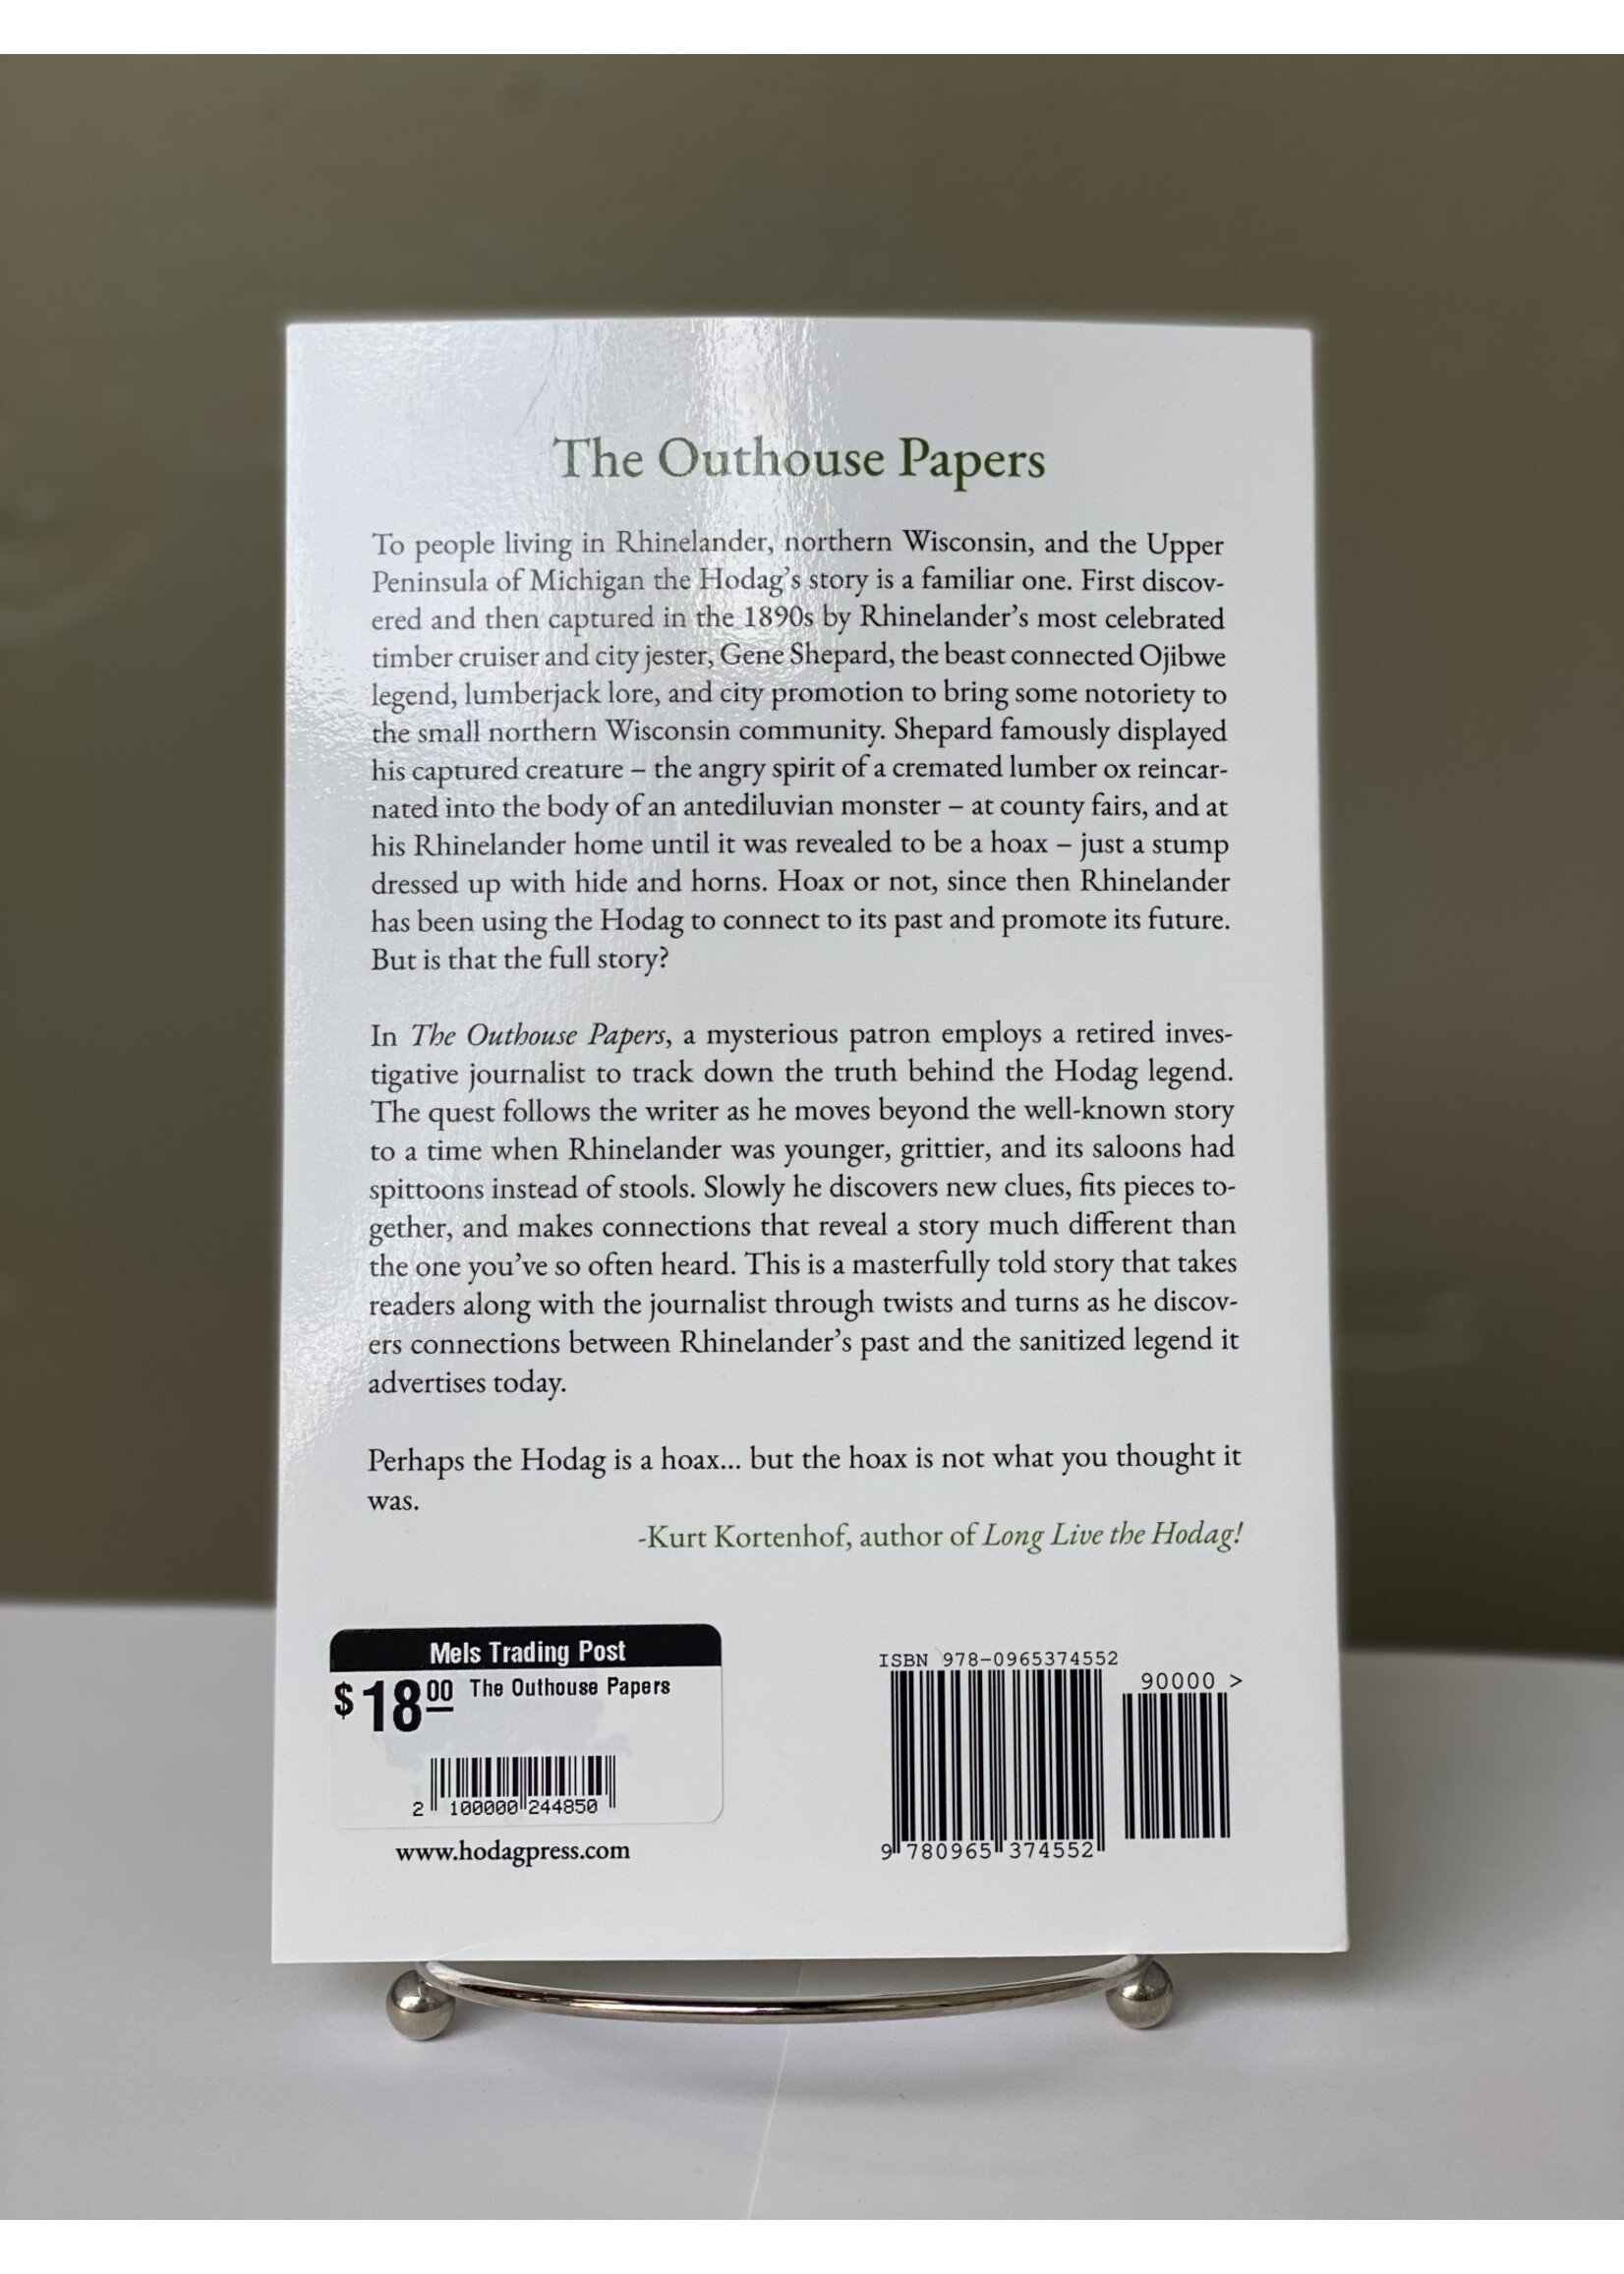 The Outhouse Papers